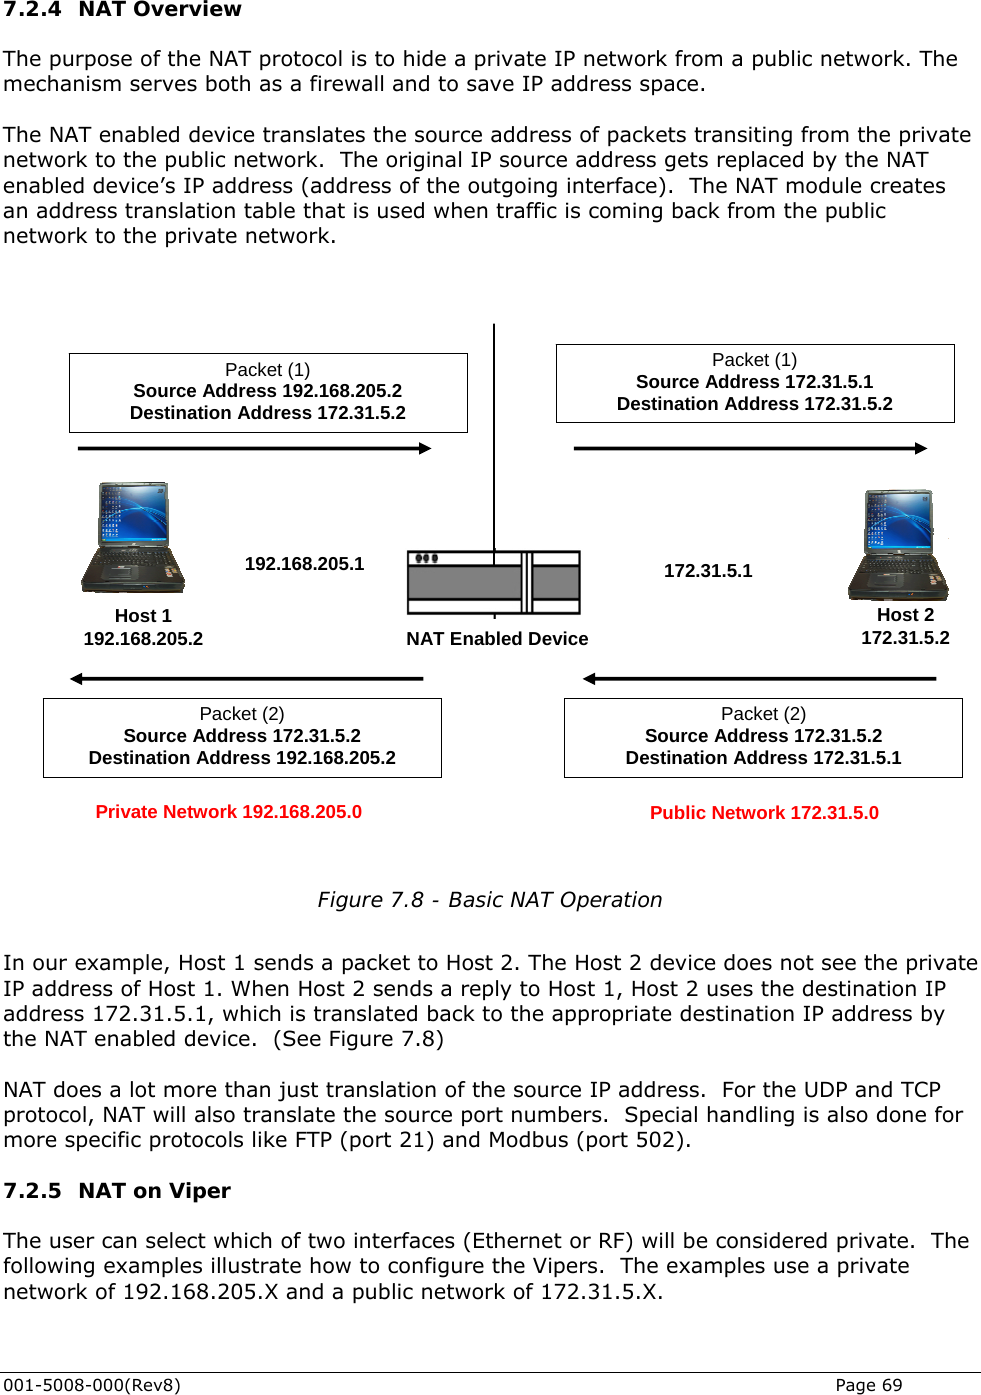   7.2.4 NAT Overview The purpose of the NAT protocol is to hide a private IP network from a public network. The mechanism serves both as a firewall and to save IP address space.  The NAT enabled device translates the source address of packets transiting from the private network to the public network.  The original IP source address gets replaced by the NAT enabled device’s IP address (address of the outgoing interface).  The NAT module creates an address translation table that is used when traffic is coming back from the public network to the private network.   Packet (1) Source Address 192.168.205.2 Destination Address 172.31.5.2 Packet (1) Source Address 172.31.5.1 Destination Address 172.31.5.2 NAT Enabled Device Packet (2) Source Address 172.31.5.2 Destination Address 192.168.205.2 Packet (2) Source Address 172.31.5.2 Destination Address 172.31.5.1 Host 1 192.168.205.2  Host 2172.31.5.2 192.168.205.1  172.31.5.1 Public Network 172.31.5.0 Private Network 192.168.205.0   Figure 7.8 - Basic NAT Operation  In our example, Host 1 sends a packet to Host 2. The Host 2 device does not see the private IP address of Host 1. When Host 2 sends a reply to Host 1, Host 2 uses the destination IP address 172.31.5.1, which is translated back to the appropriate destination IP address by the NAT enabled device.  (See Figure 7.8)   NAT does a lot more than just translation of the source IP address.  For the UDP and TCP protocol, NAT will also translate the source port numbers.  Special handling is also done for more specific protocols like FTP (port 21) and Modbus (port 502). 7.2.5 NAT on Viper The user can select which of two interfaces (Ethernet or RF) will be considered private.  The following examples illustrate how to configure the Vipers.  The examples use a private network of 192.168.205.X and a public network of 172.31.5.X.  001-5008-000(Rev8)   Page 69 